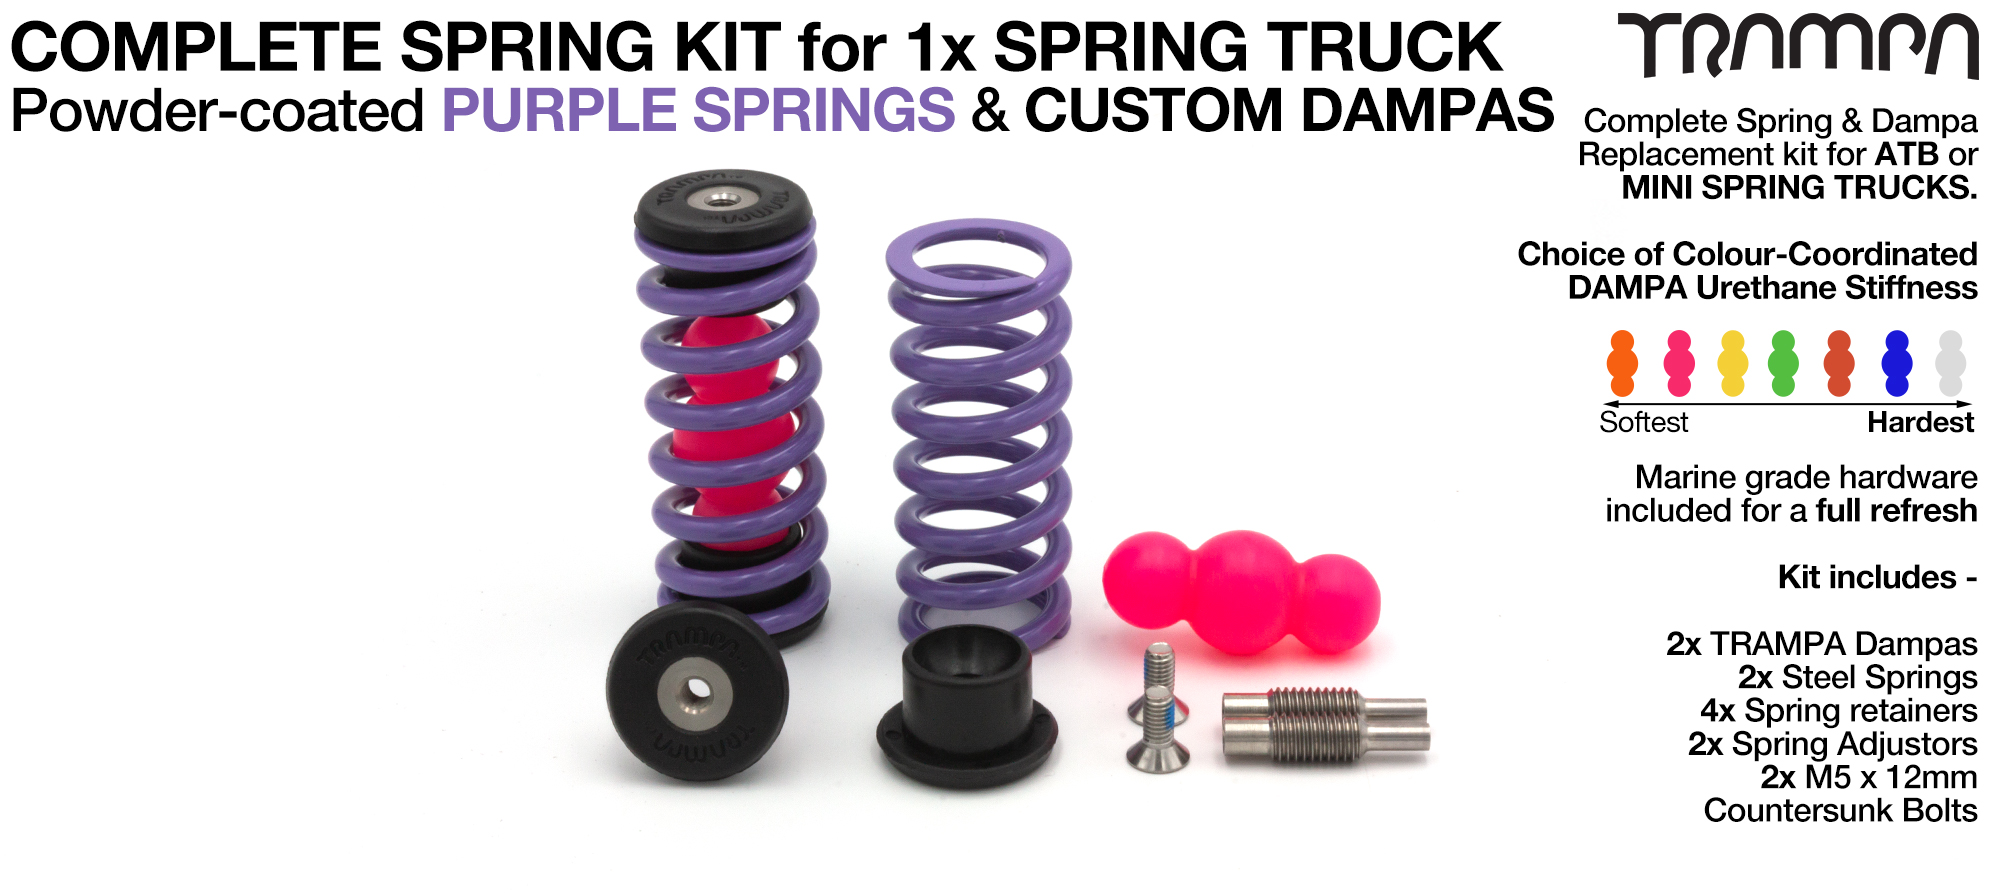 Spring kit Complete for 1x Truck - 2x Spring 2x Dampa 4x Spring Retainers 2x Spring Adjuster & 2 M5x12mm Countersunk Bolt PURPLE Springs 